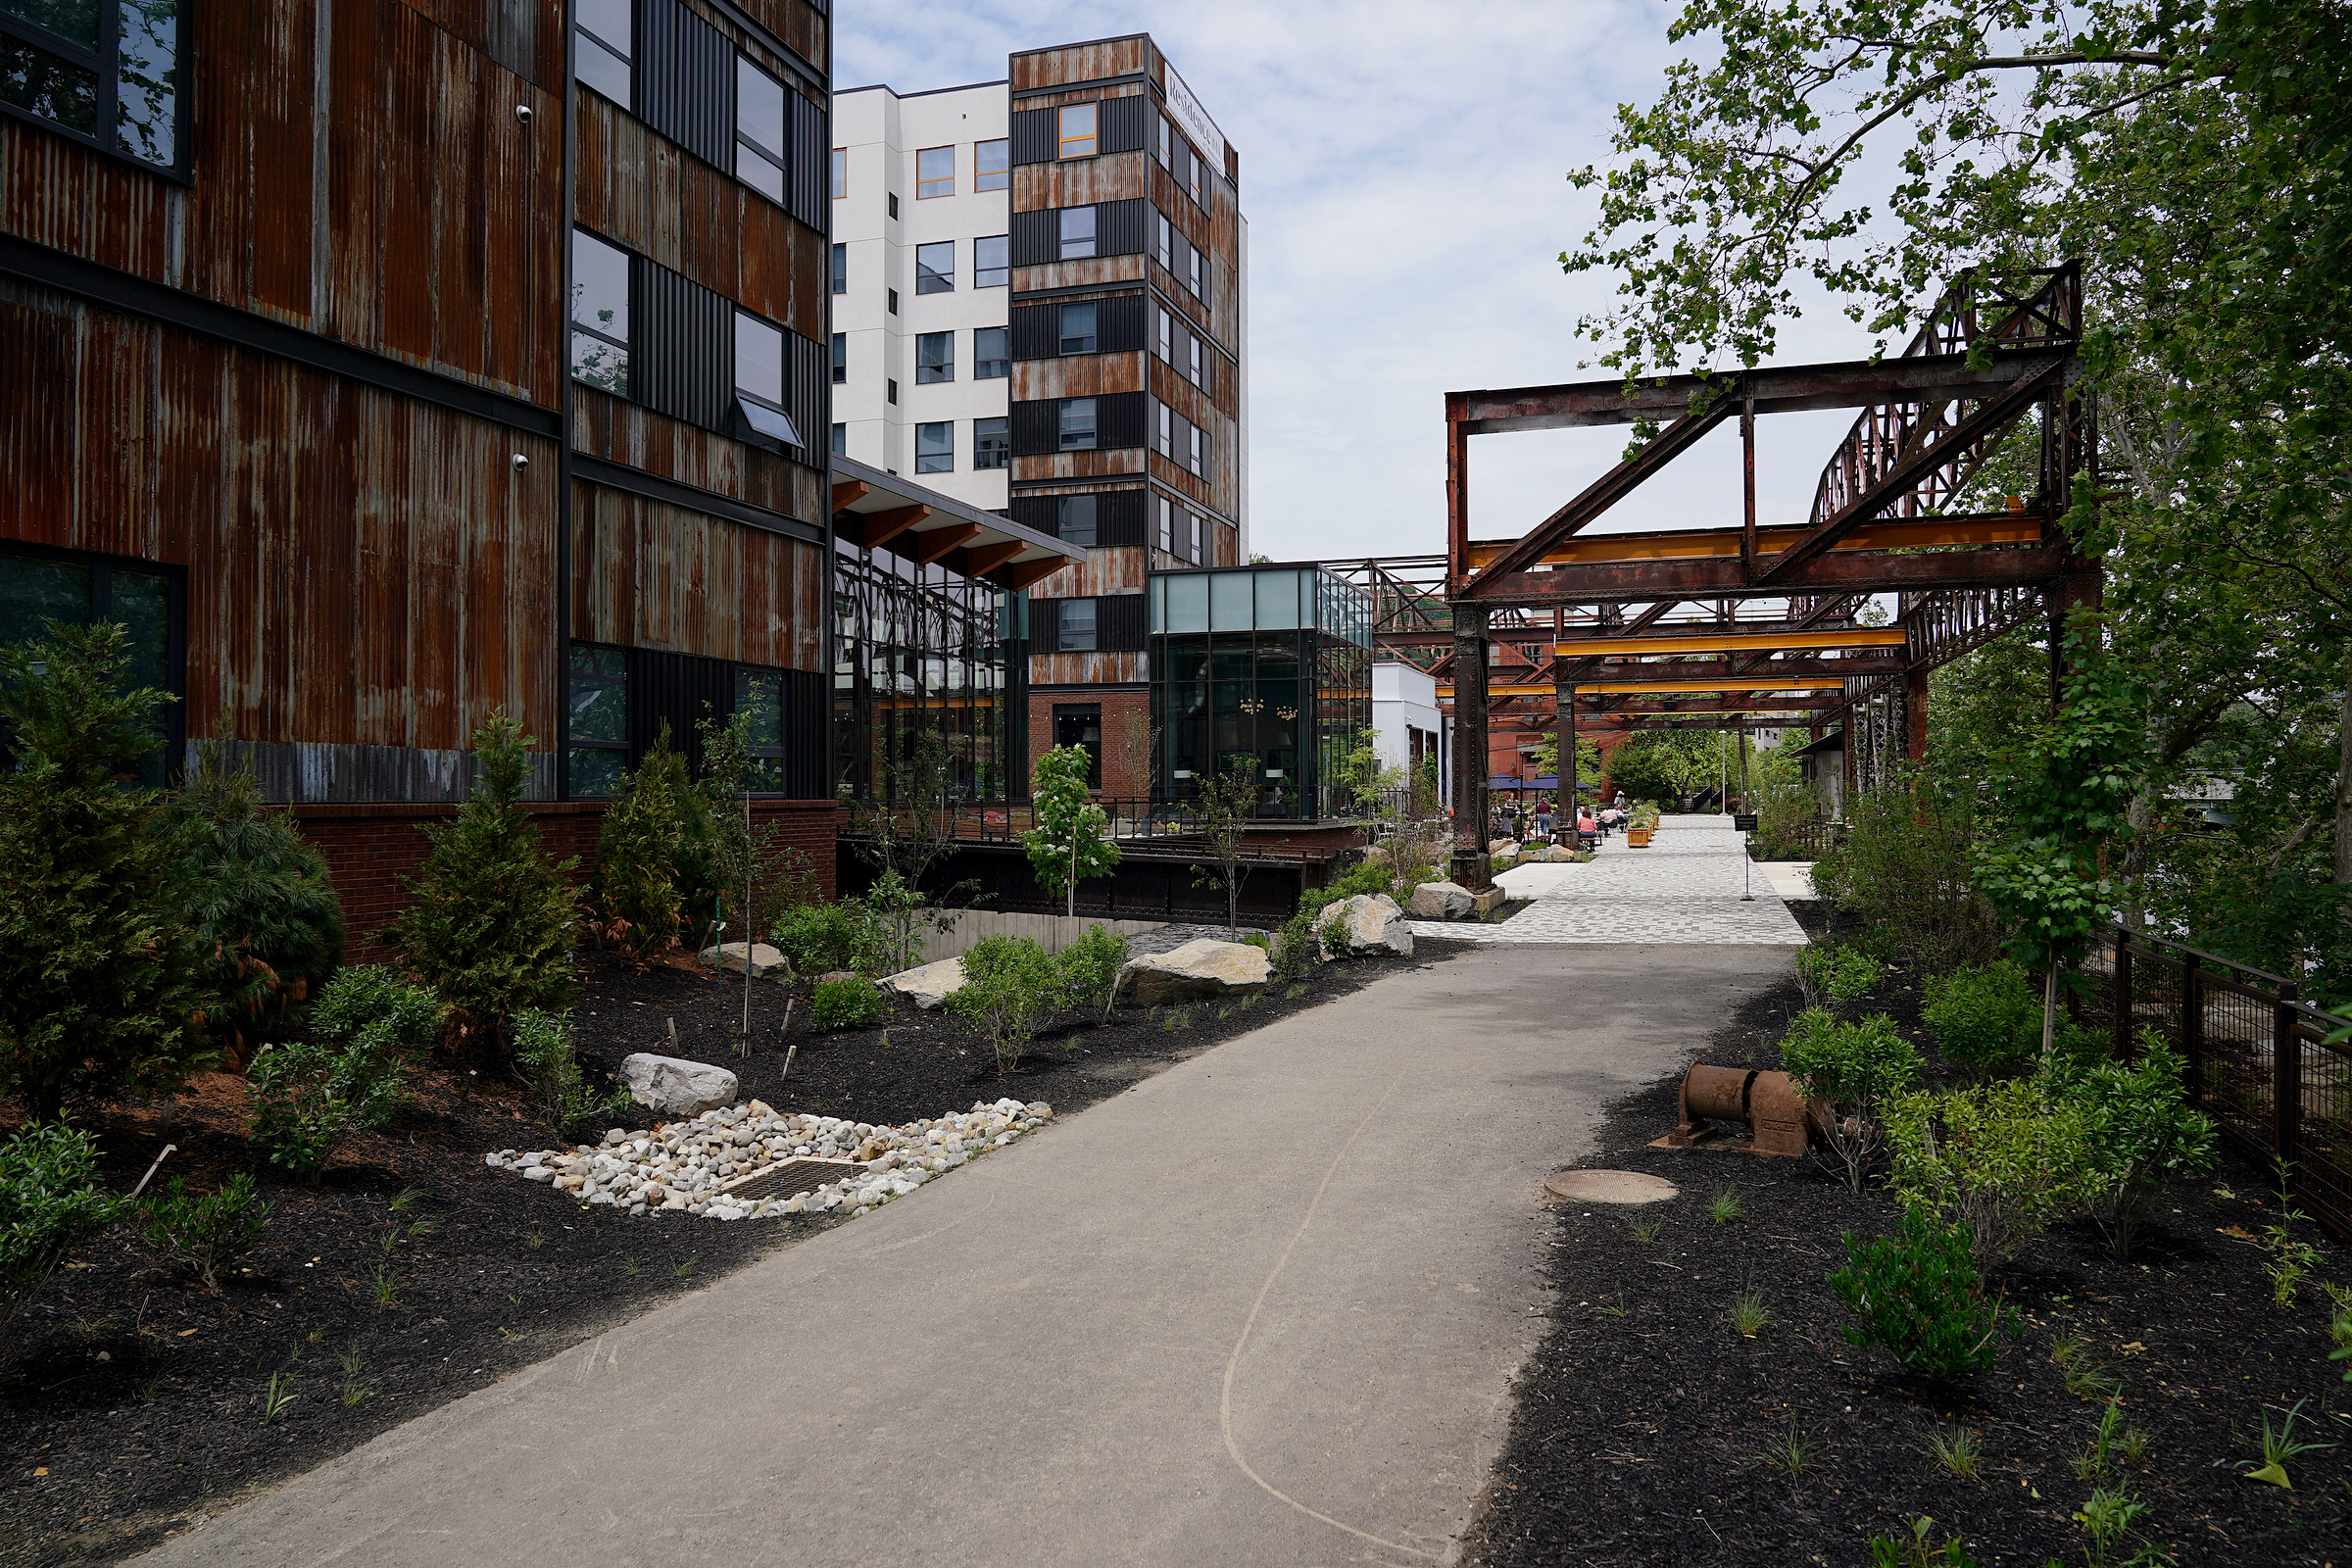 The Ironworks at Pencoyd Landing is pictured in Bala Cynwyd, Pa., on Wednesday, June 2, 2021. The new development, which opened earlier this year with a restaurant and hotel, is located on the site of the former Pencoyd Iron Works along the Schuylkill.